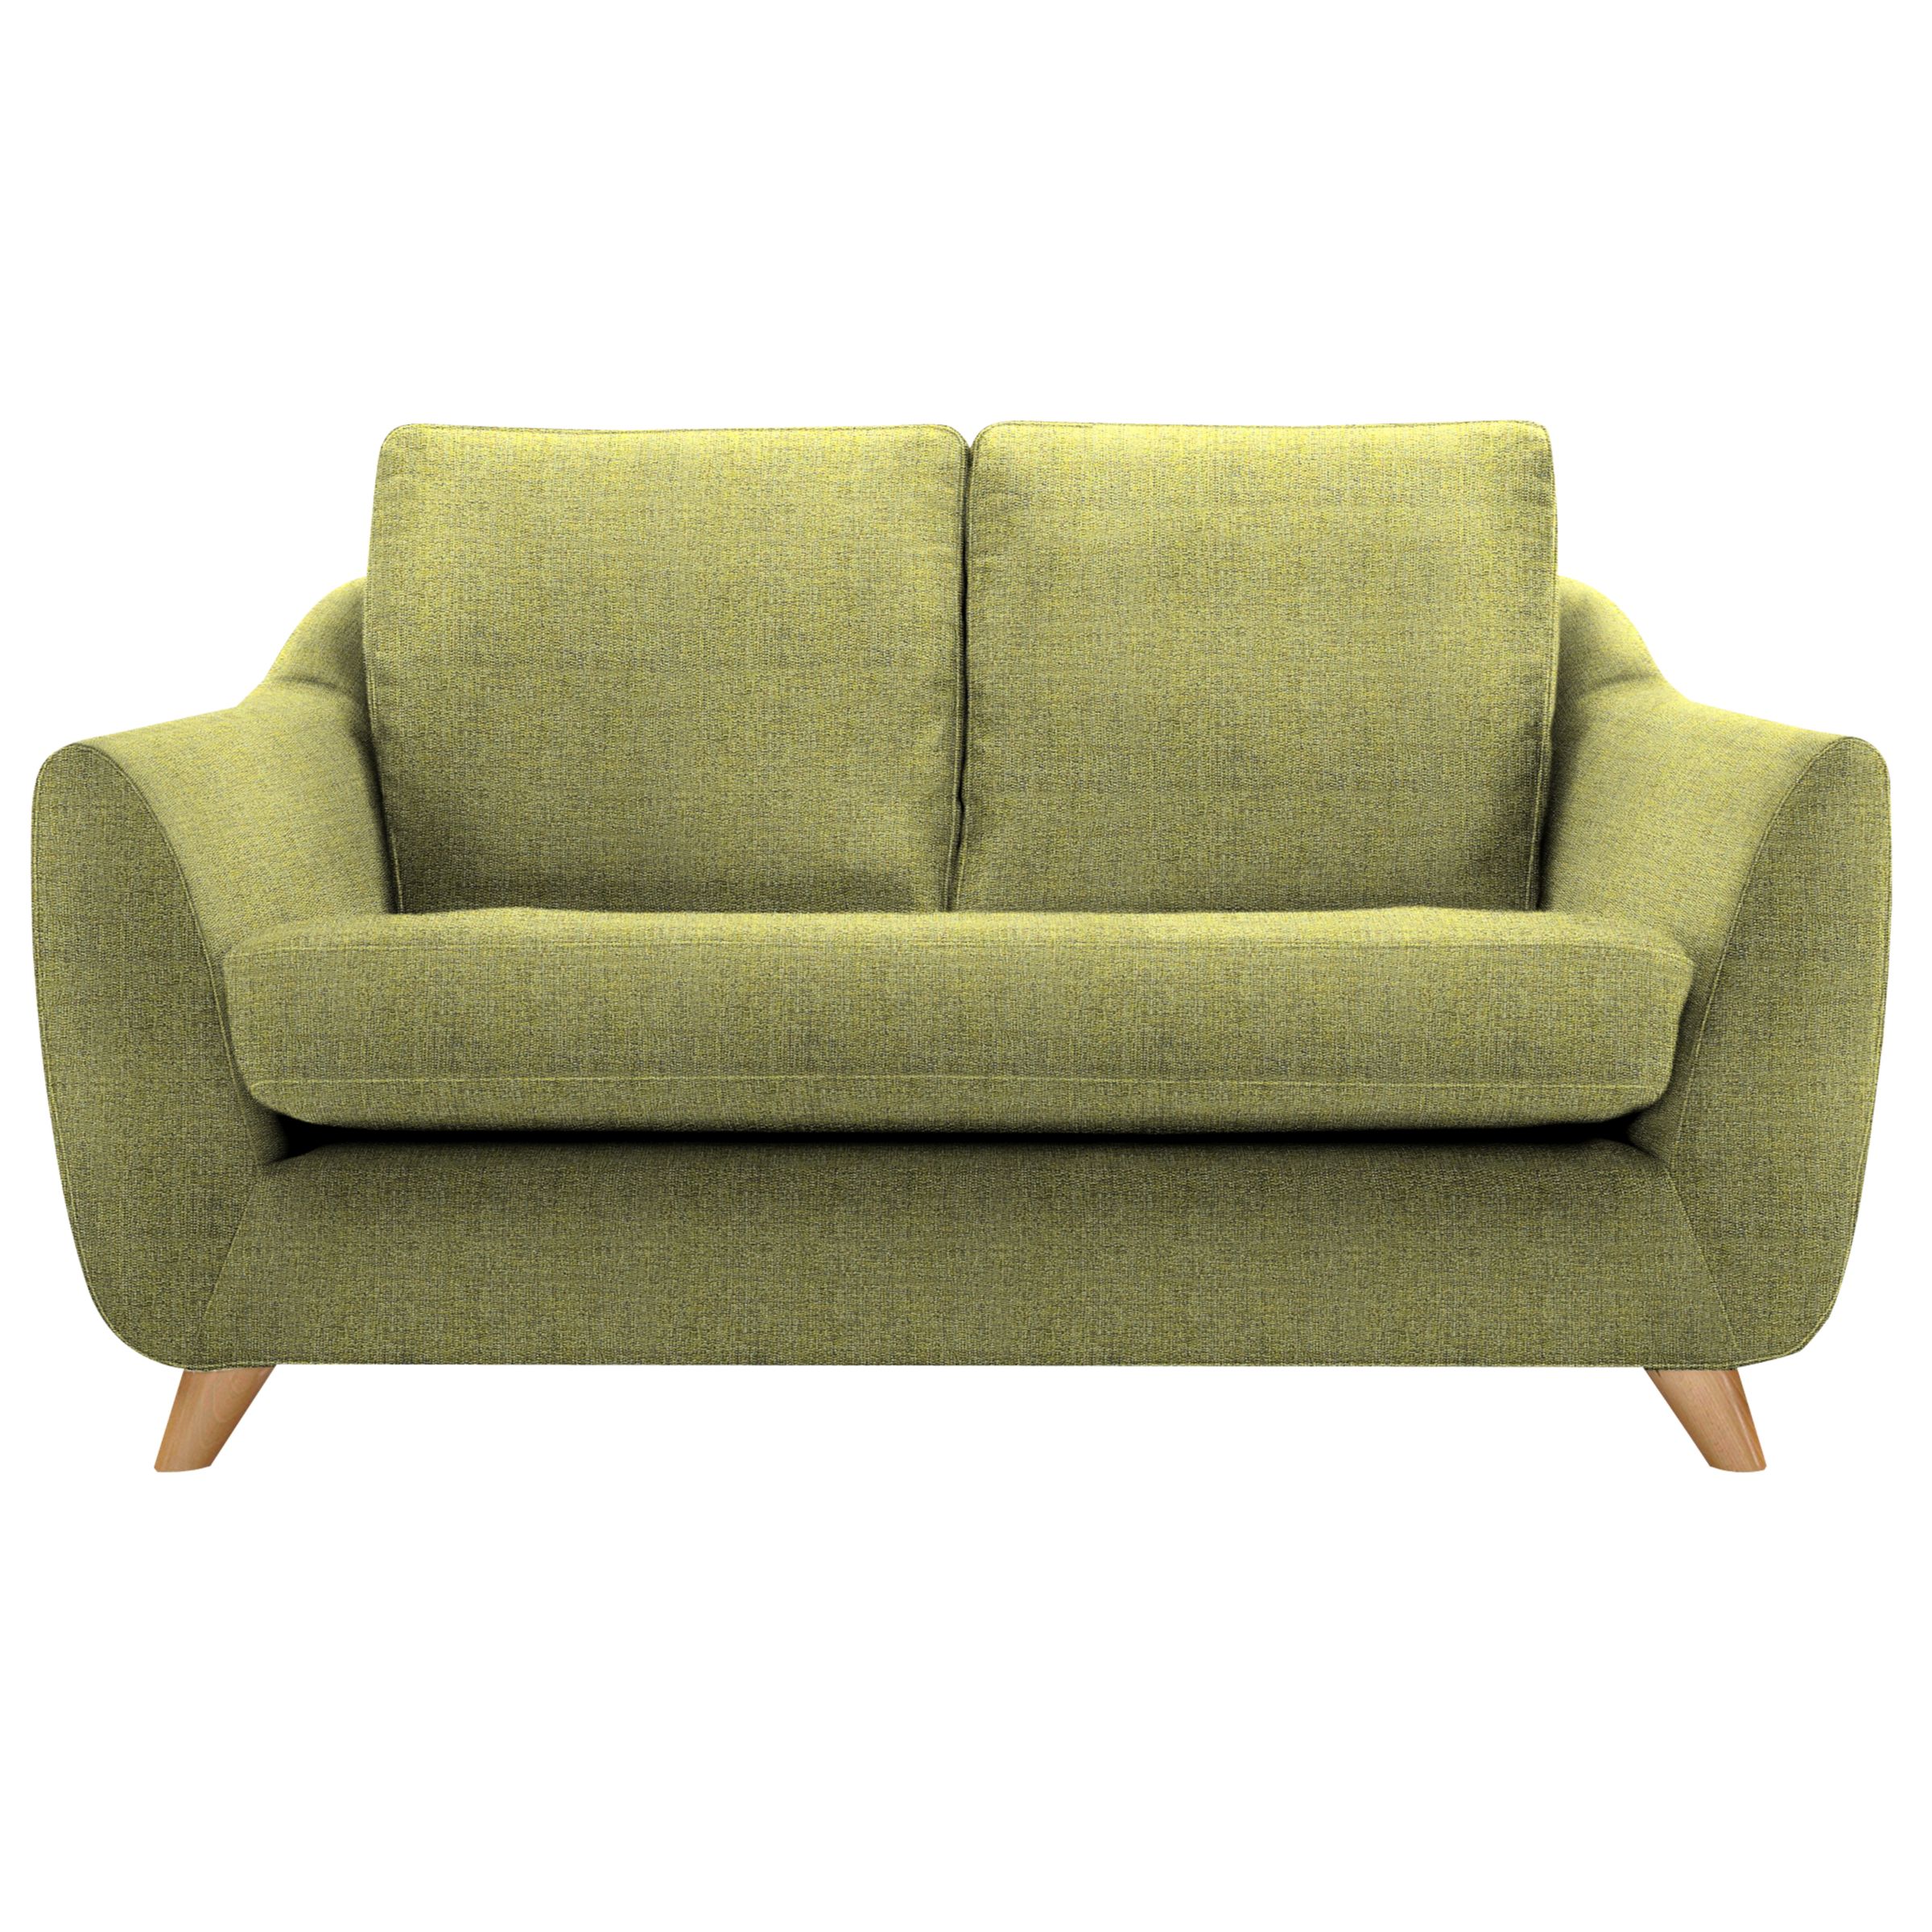 G Plan Vintage The Sixty Seven Small Sofa, Marl Green, width 154cm